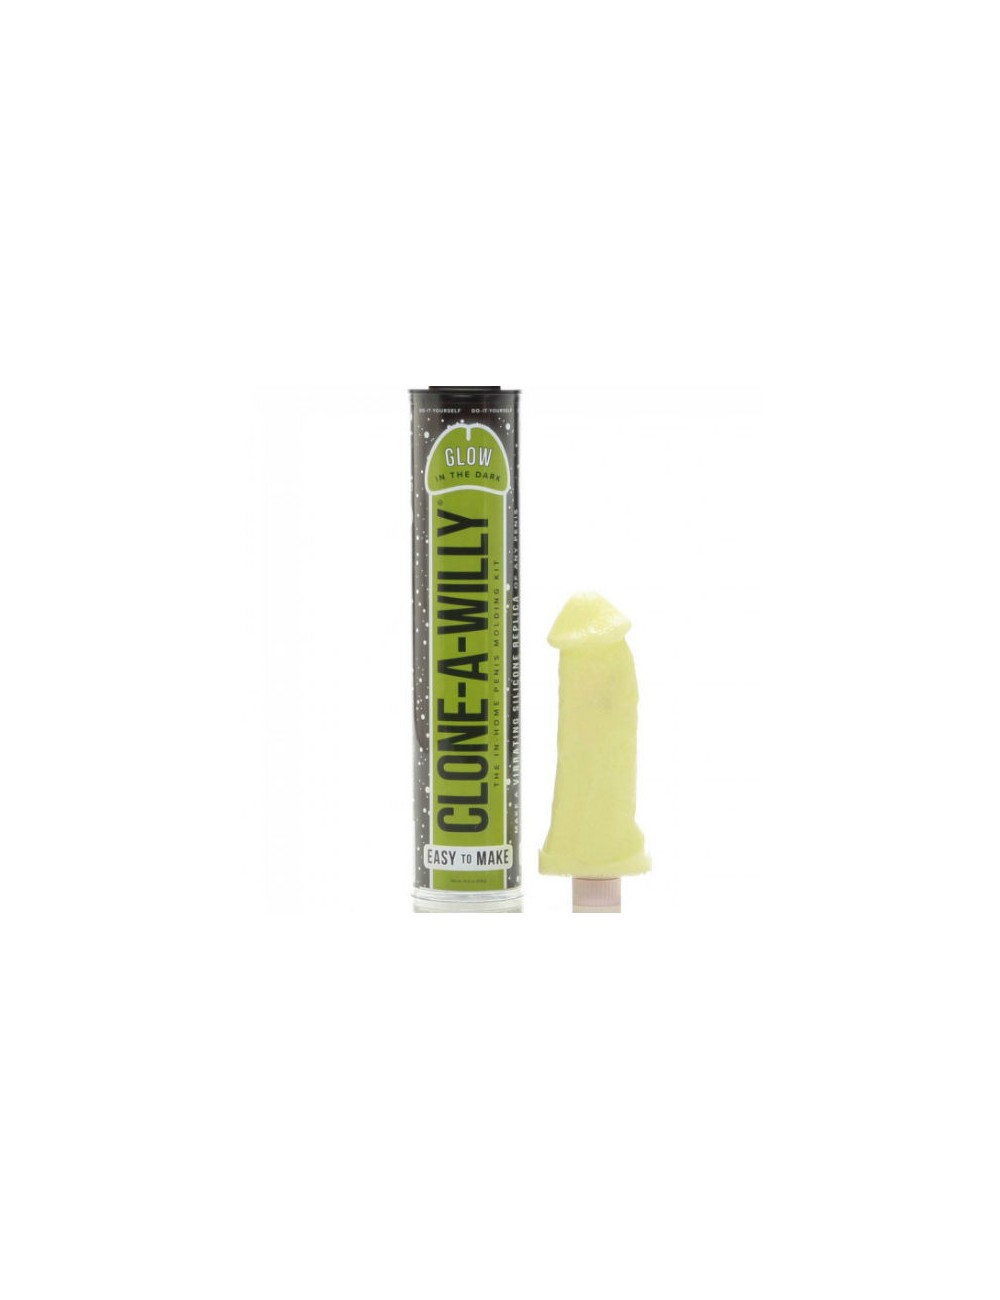 CLONE A WILLY  CLONE GLOW IN THE DARK GREEN VIBRATING KIT